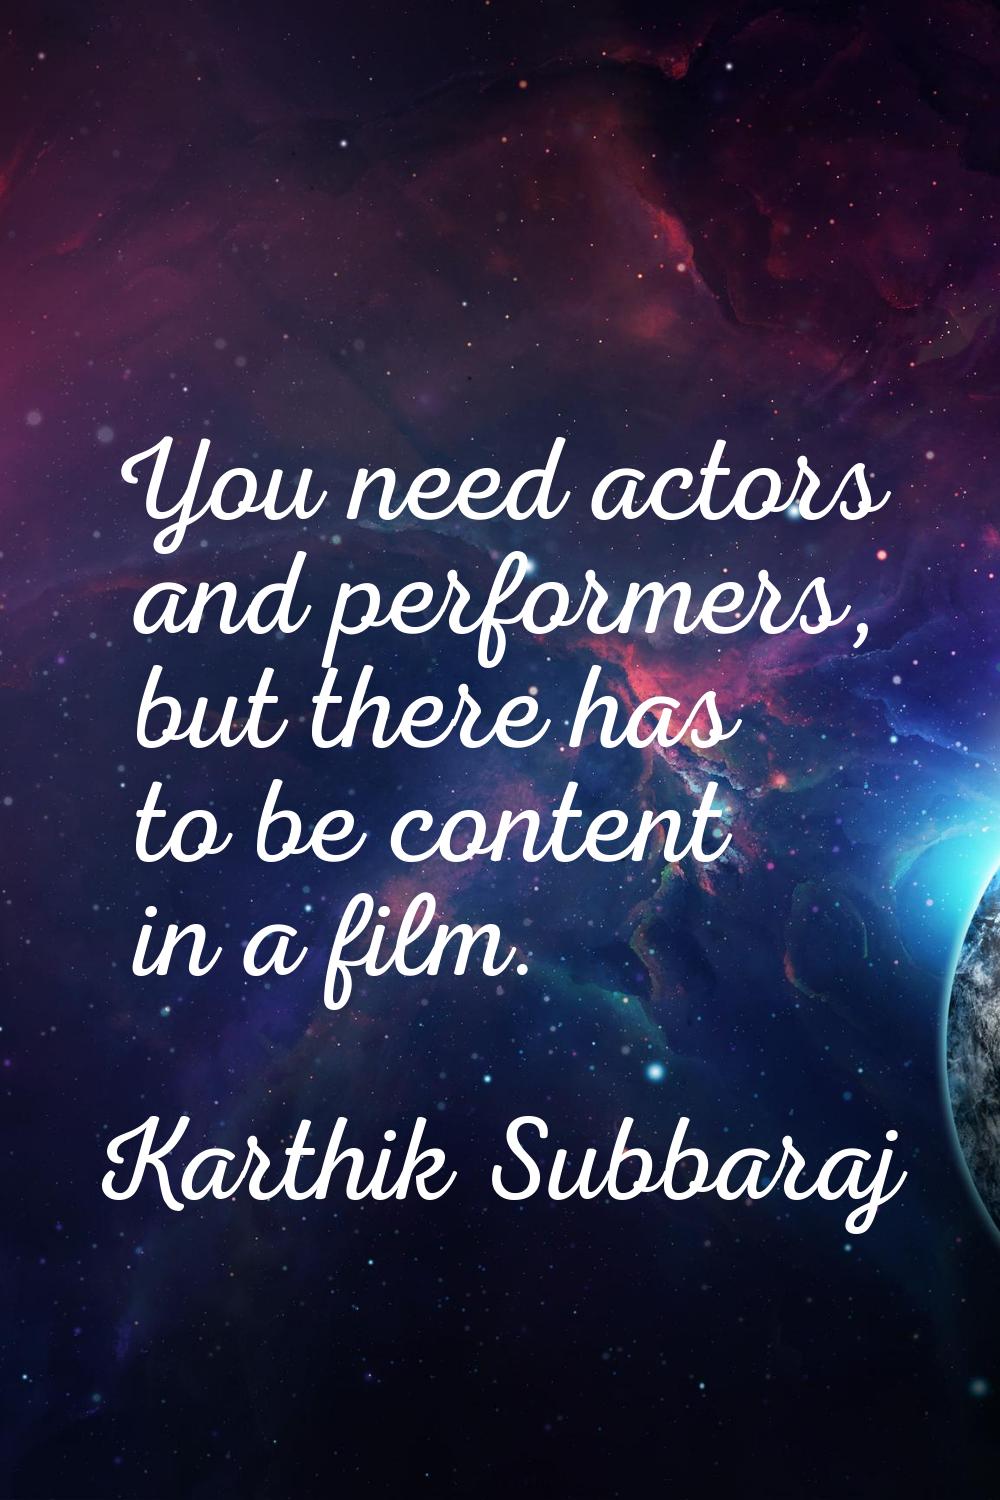 You need actors and performers, but there has to be content in a film.